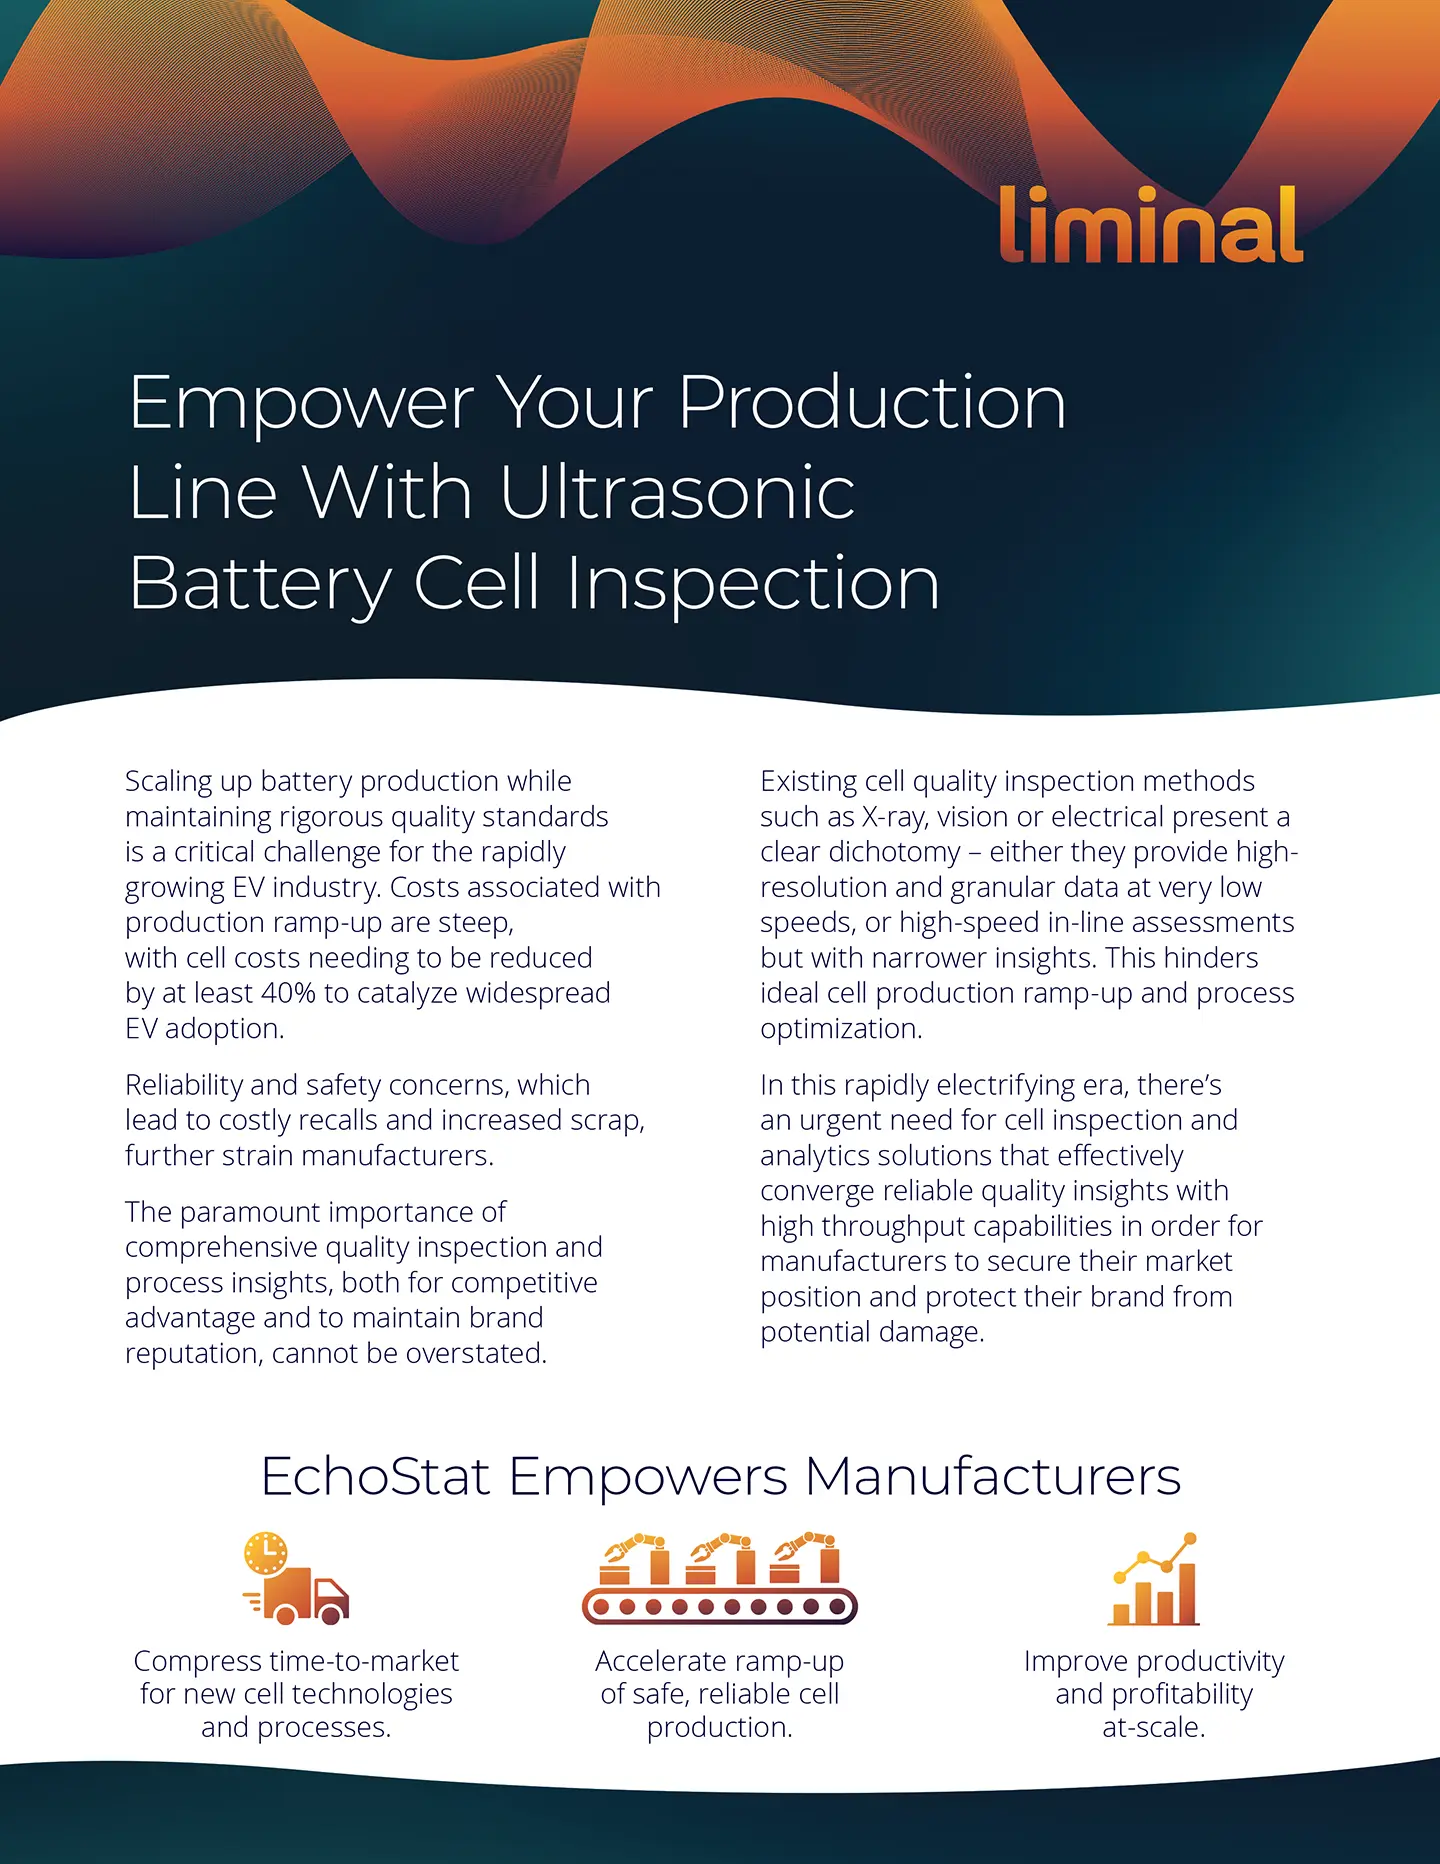 Liminal. Cover of Executive Summary. Titled: Empower Your Production Line With Ultrasonic Battery Cell Inspection.